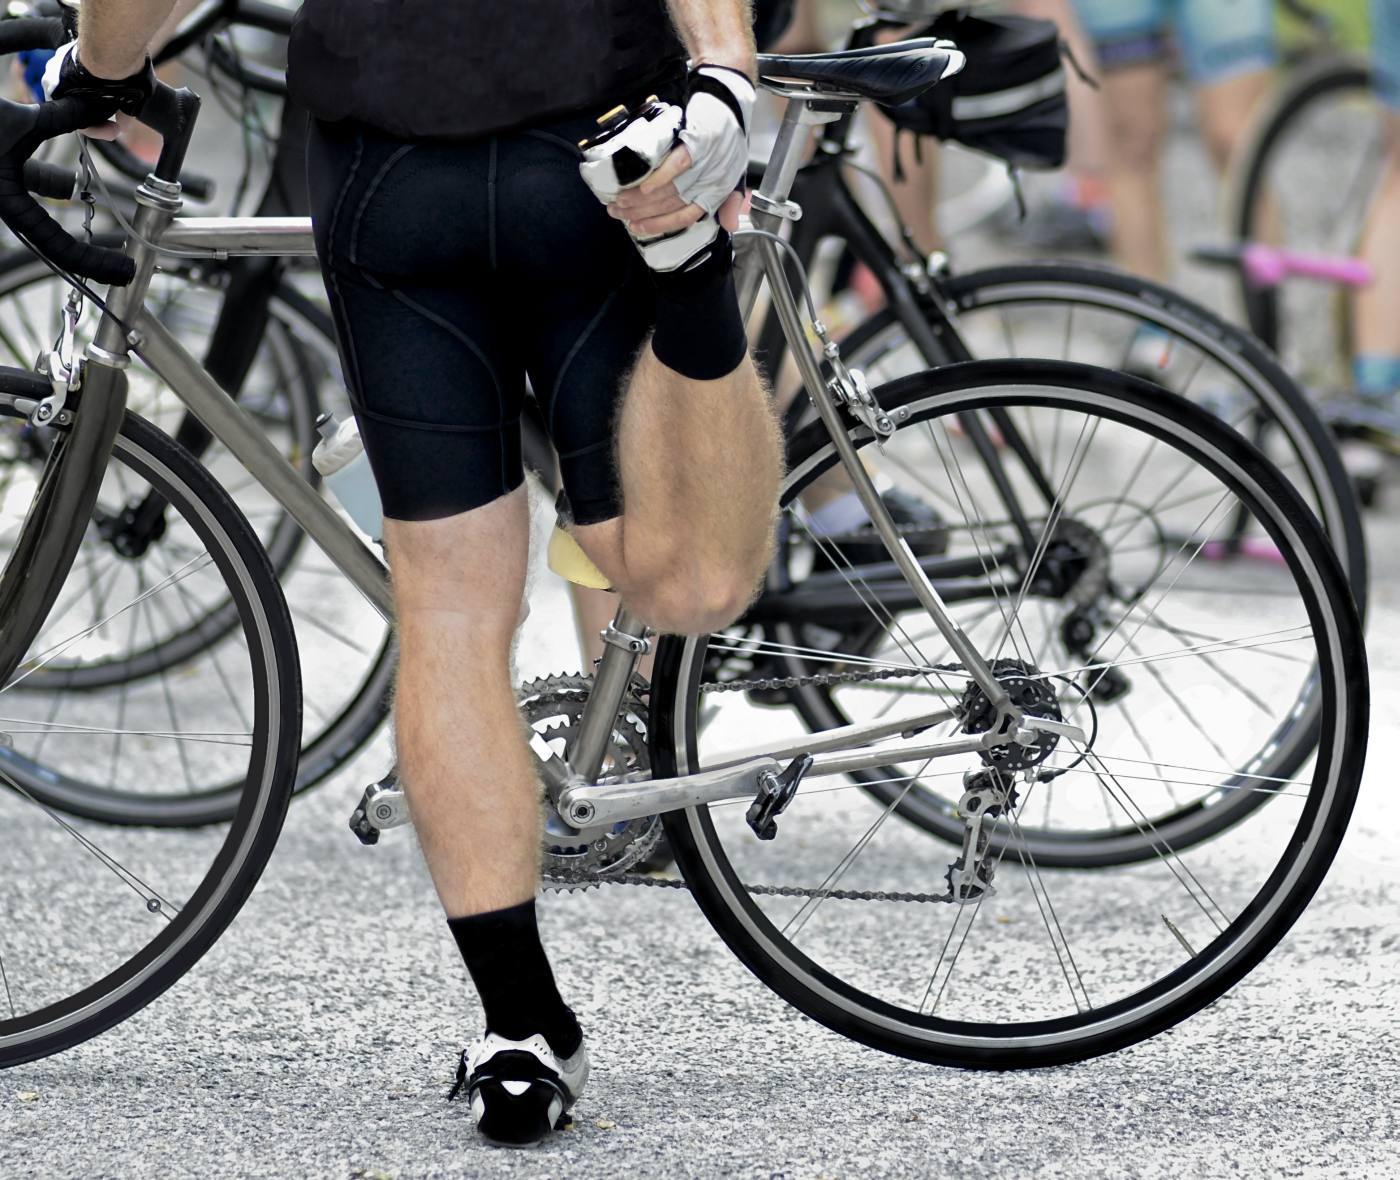 Man stretching his legs before a bicycle event.